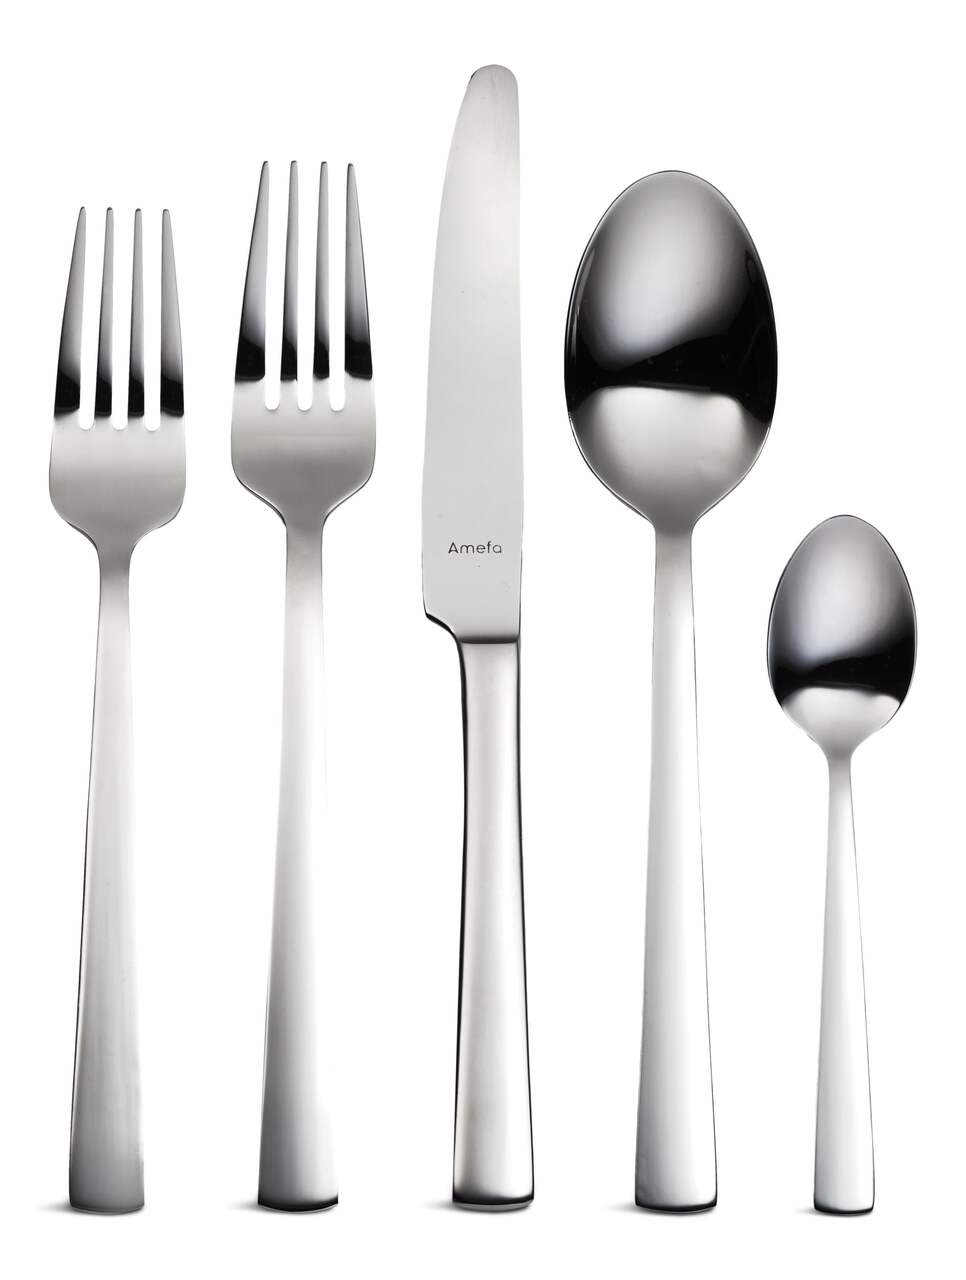 https://media-www.canadiantire.ca/product/living/kitchen/dining-and-entertaining/1426401/paderno-argentia-professional-series-60pc-flatware-set-282181f9-c9b5-486d-bea2-ca72daeaf0bc-jpgrendition.jpg?imdensity=1&imwidth=640&impolicy=mZoom